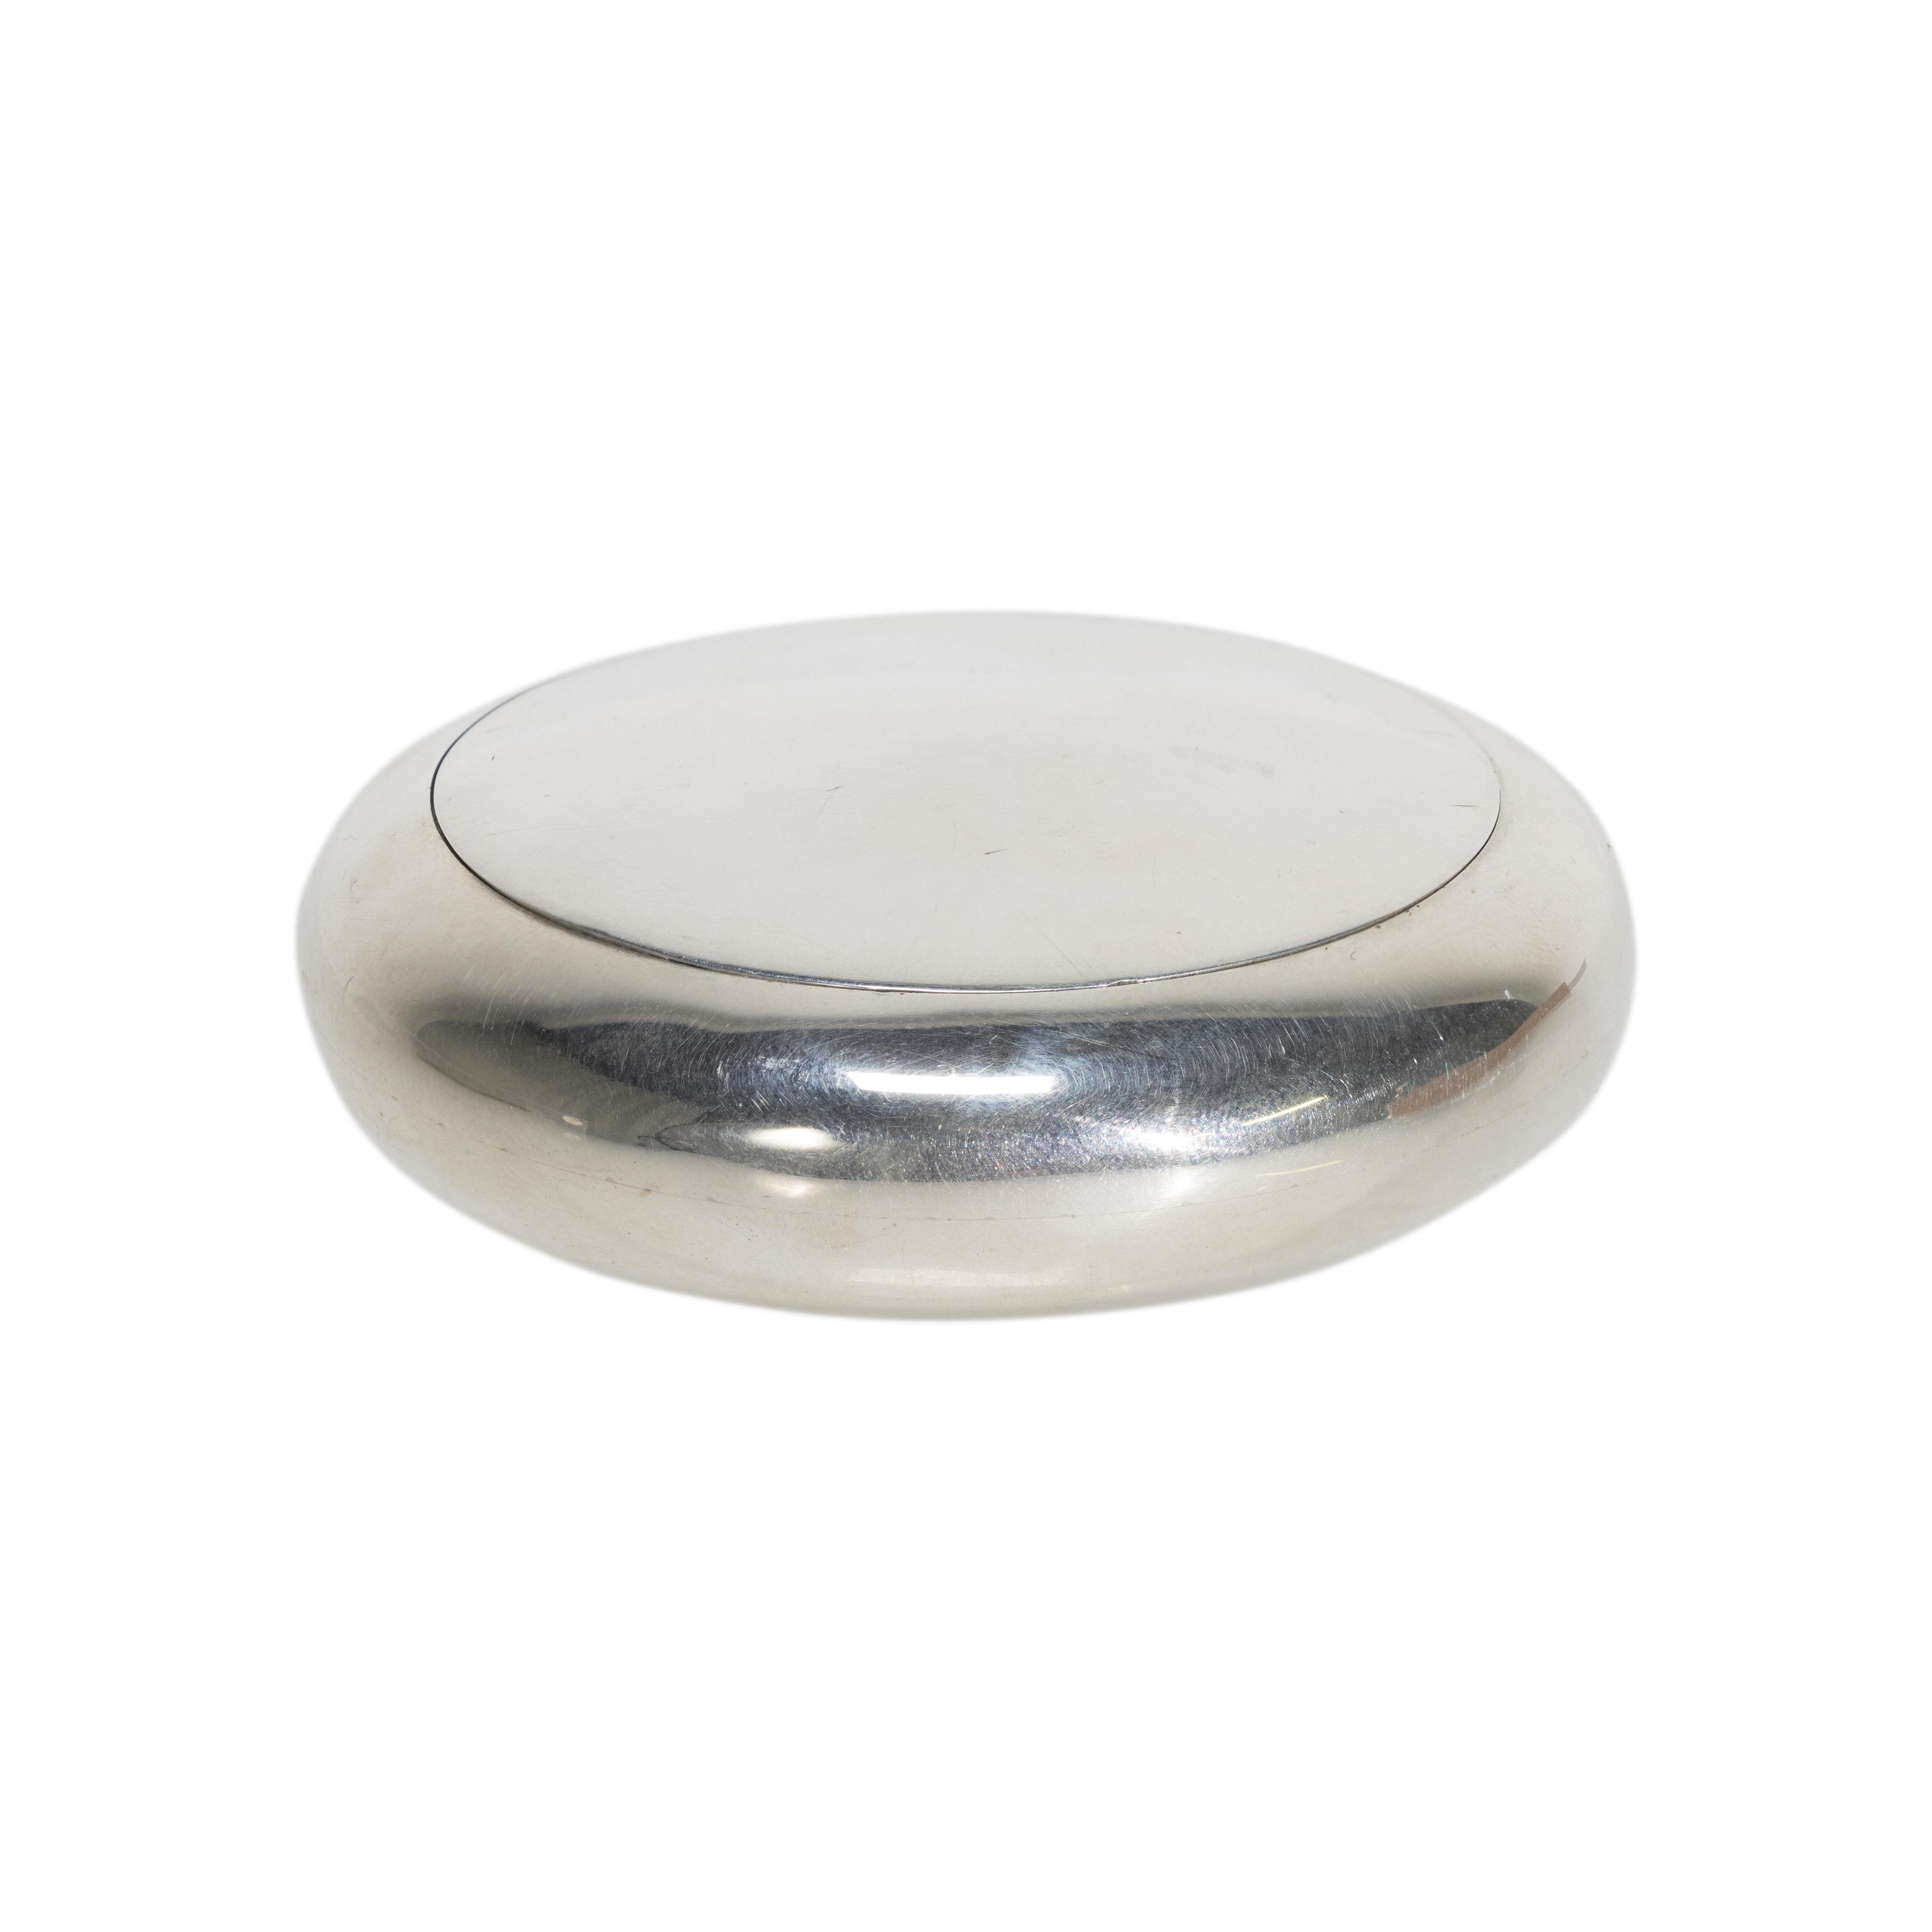 Sterling silver ladies compact case or pill box. Lid snaps tightly closed. Marked under lid 